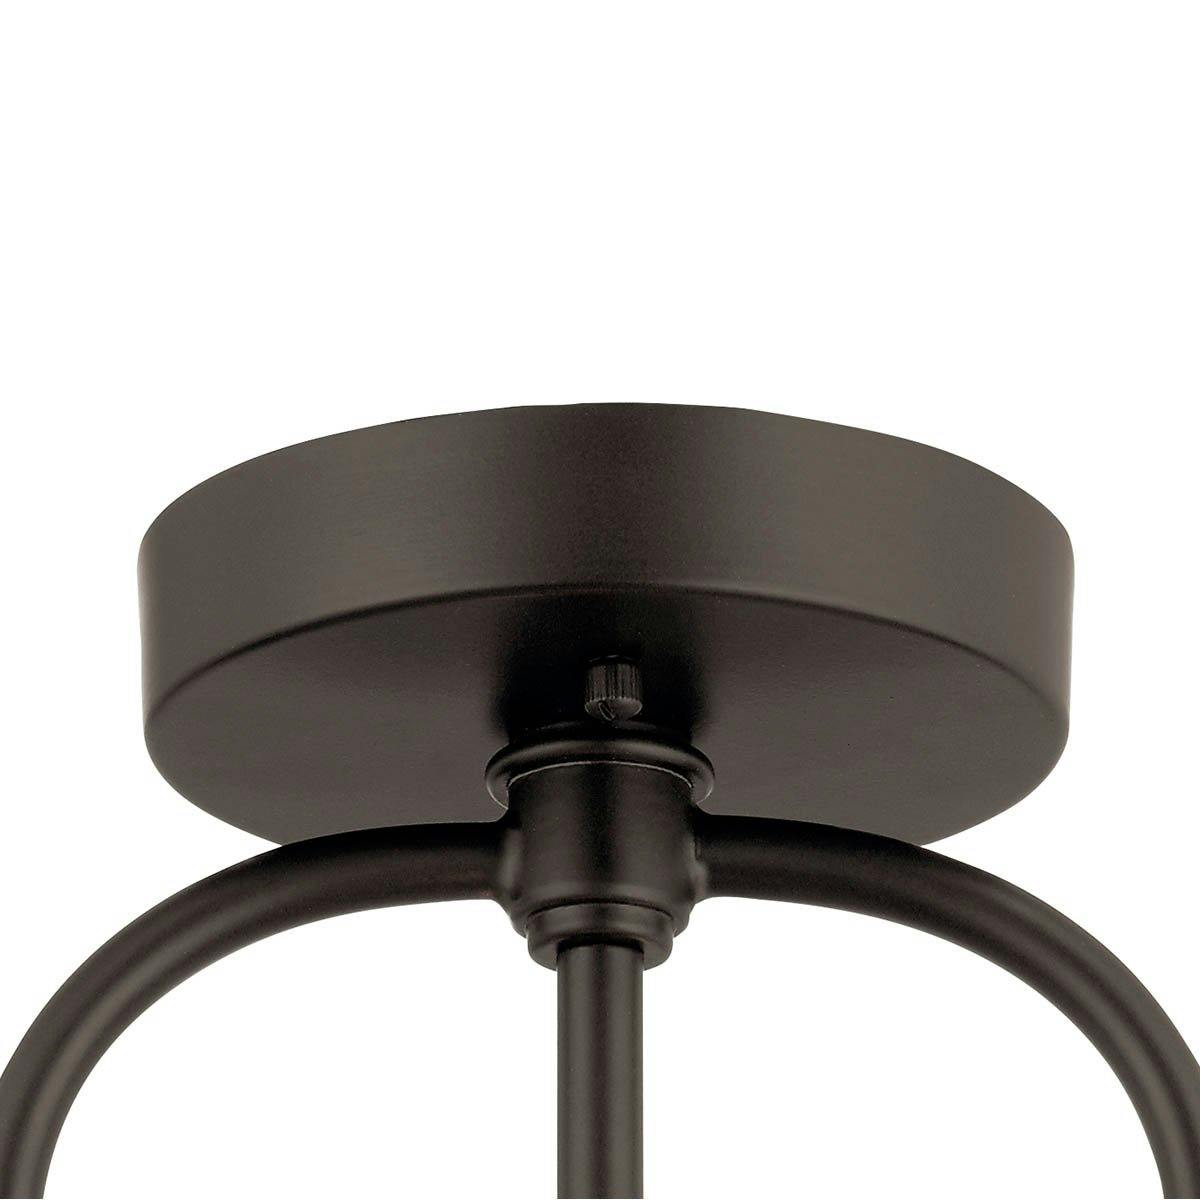 Canopy image of the Aldean Flush Mount Light 38224 on a white background